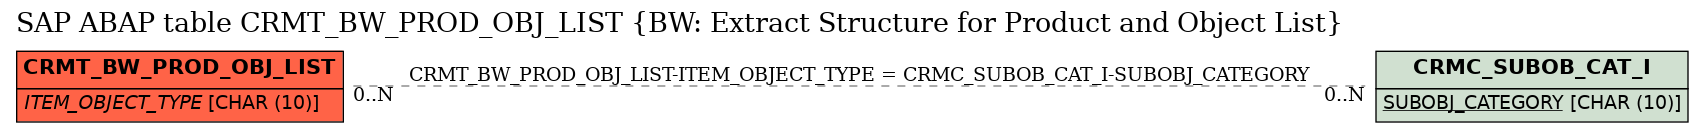 E-R Diagram for table CRMT_BW_PROD_OBJ_LIST (BW: Extract Structure for Product and Object List)